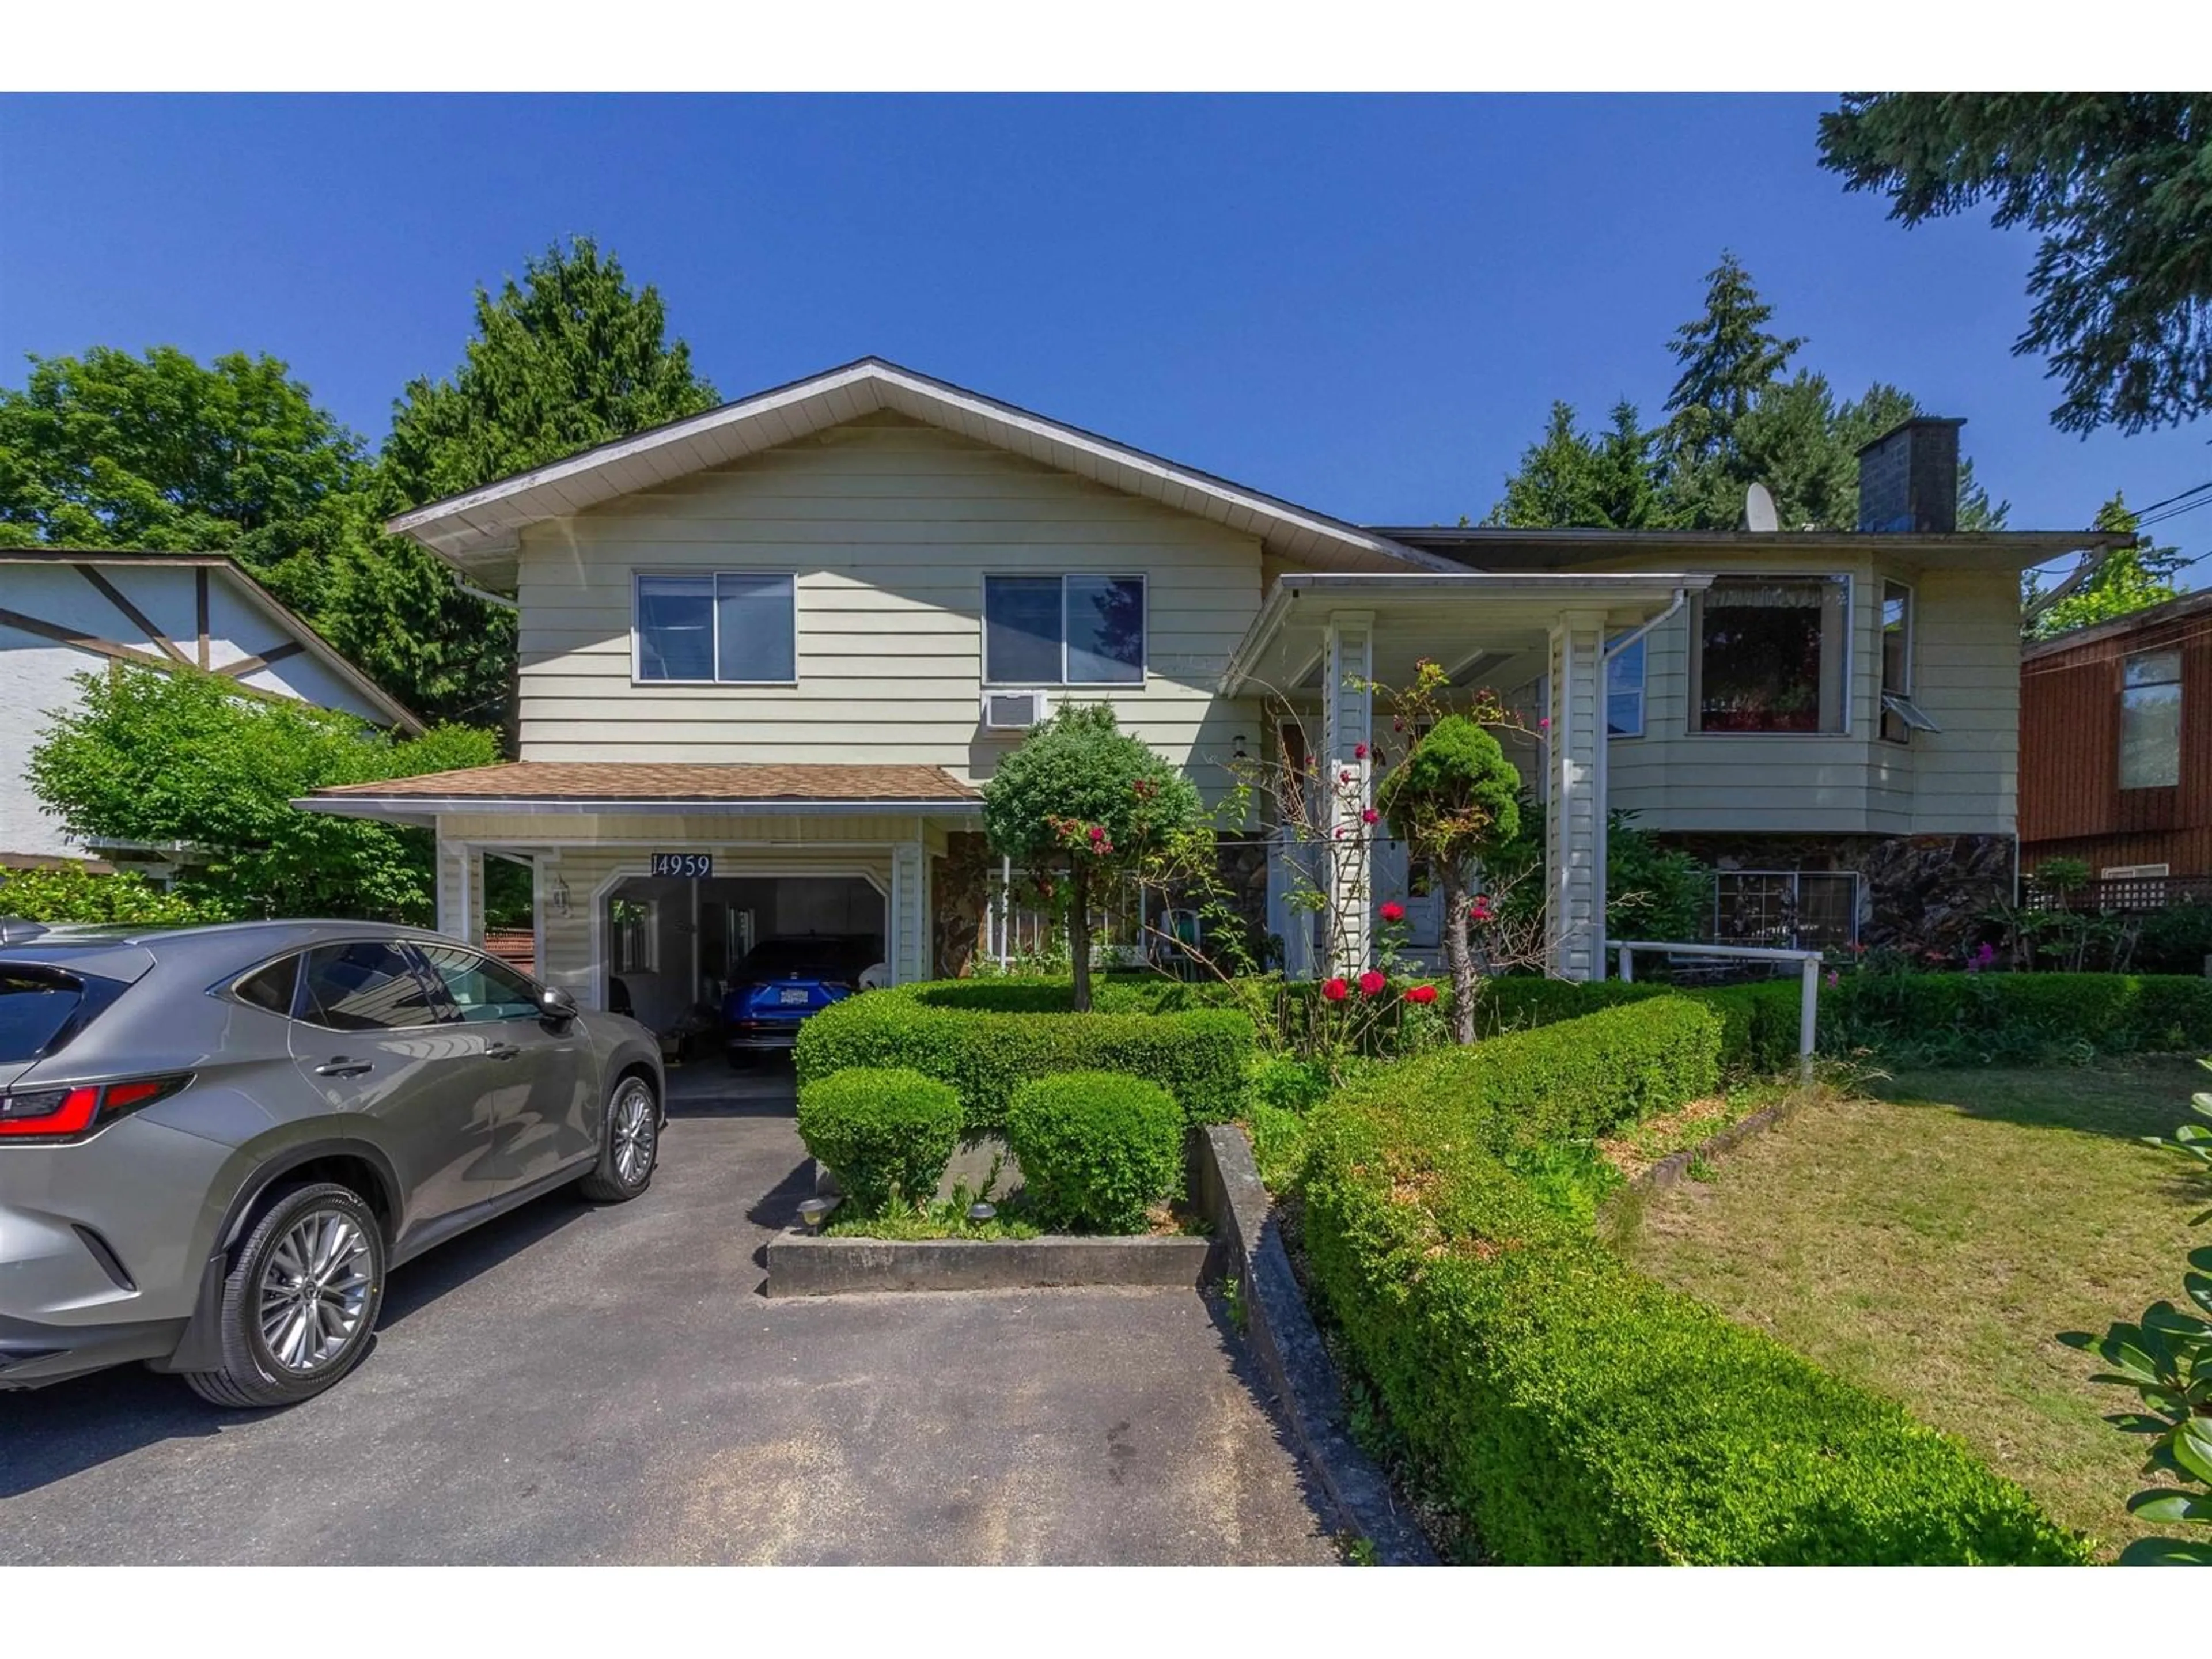 Frontside or backside of a home for 14959 90A AVENUE, Surrey British Columbia V3R1B3